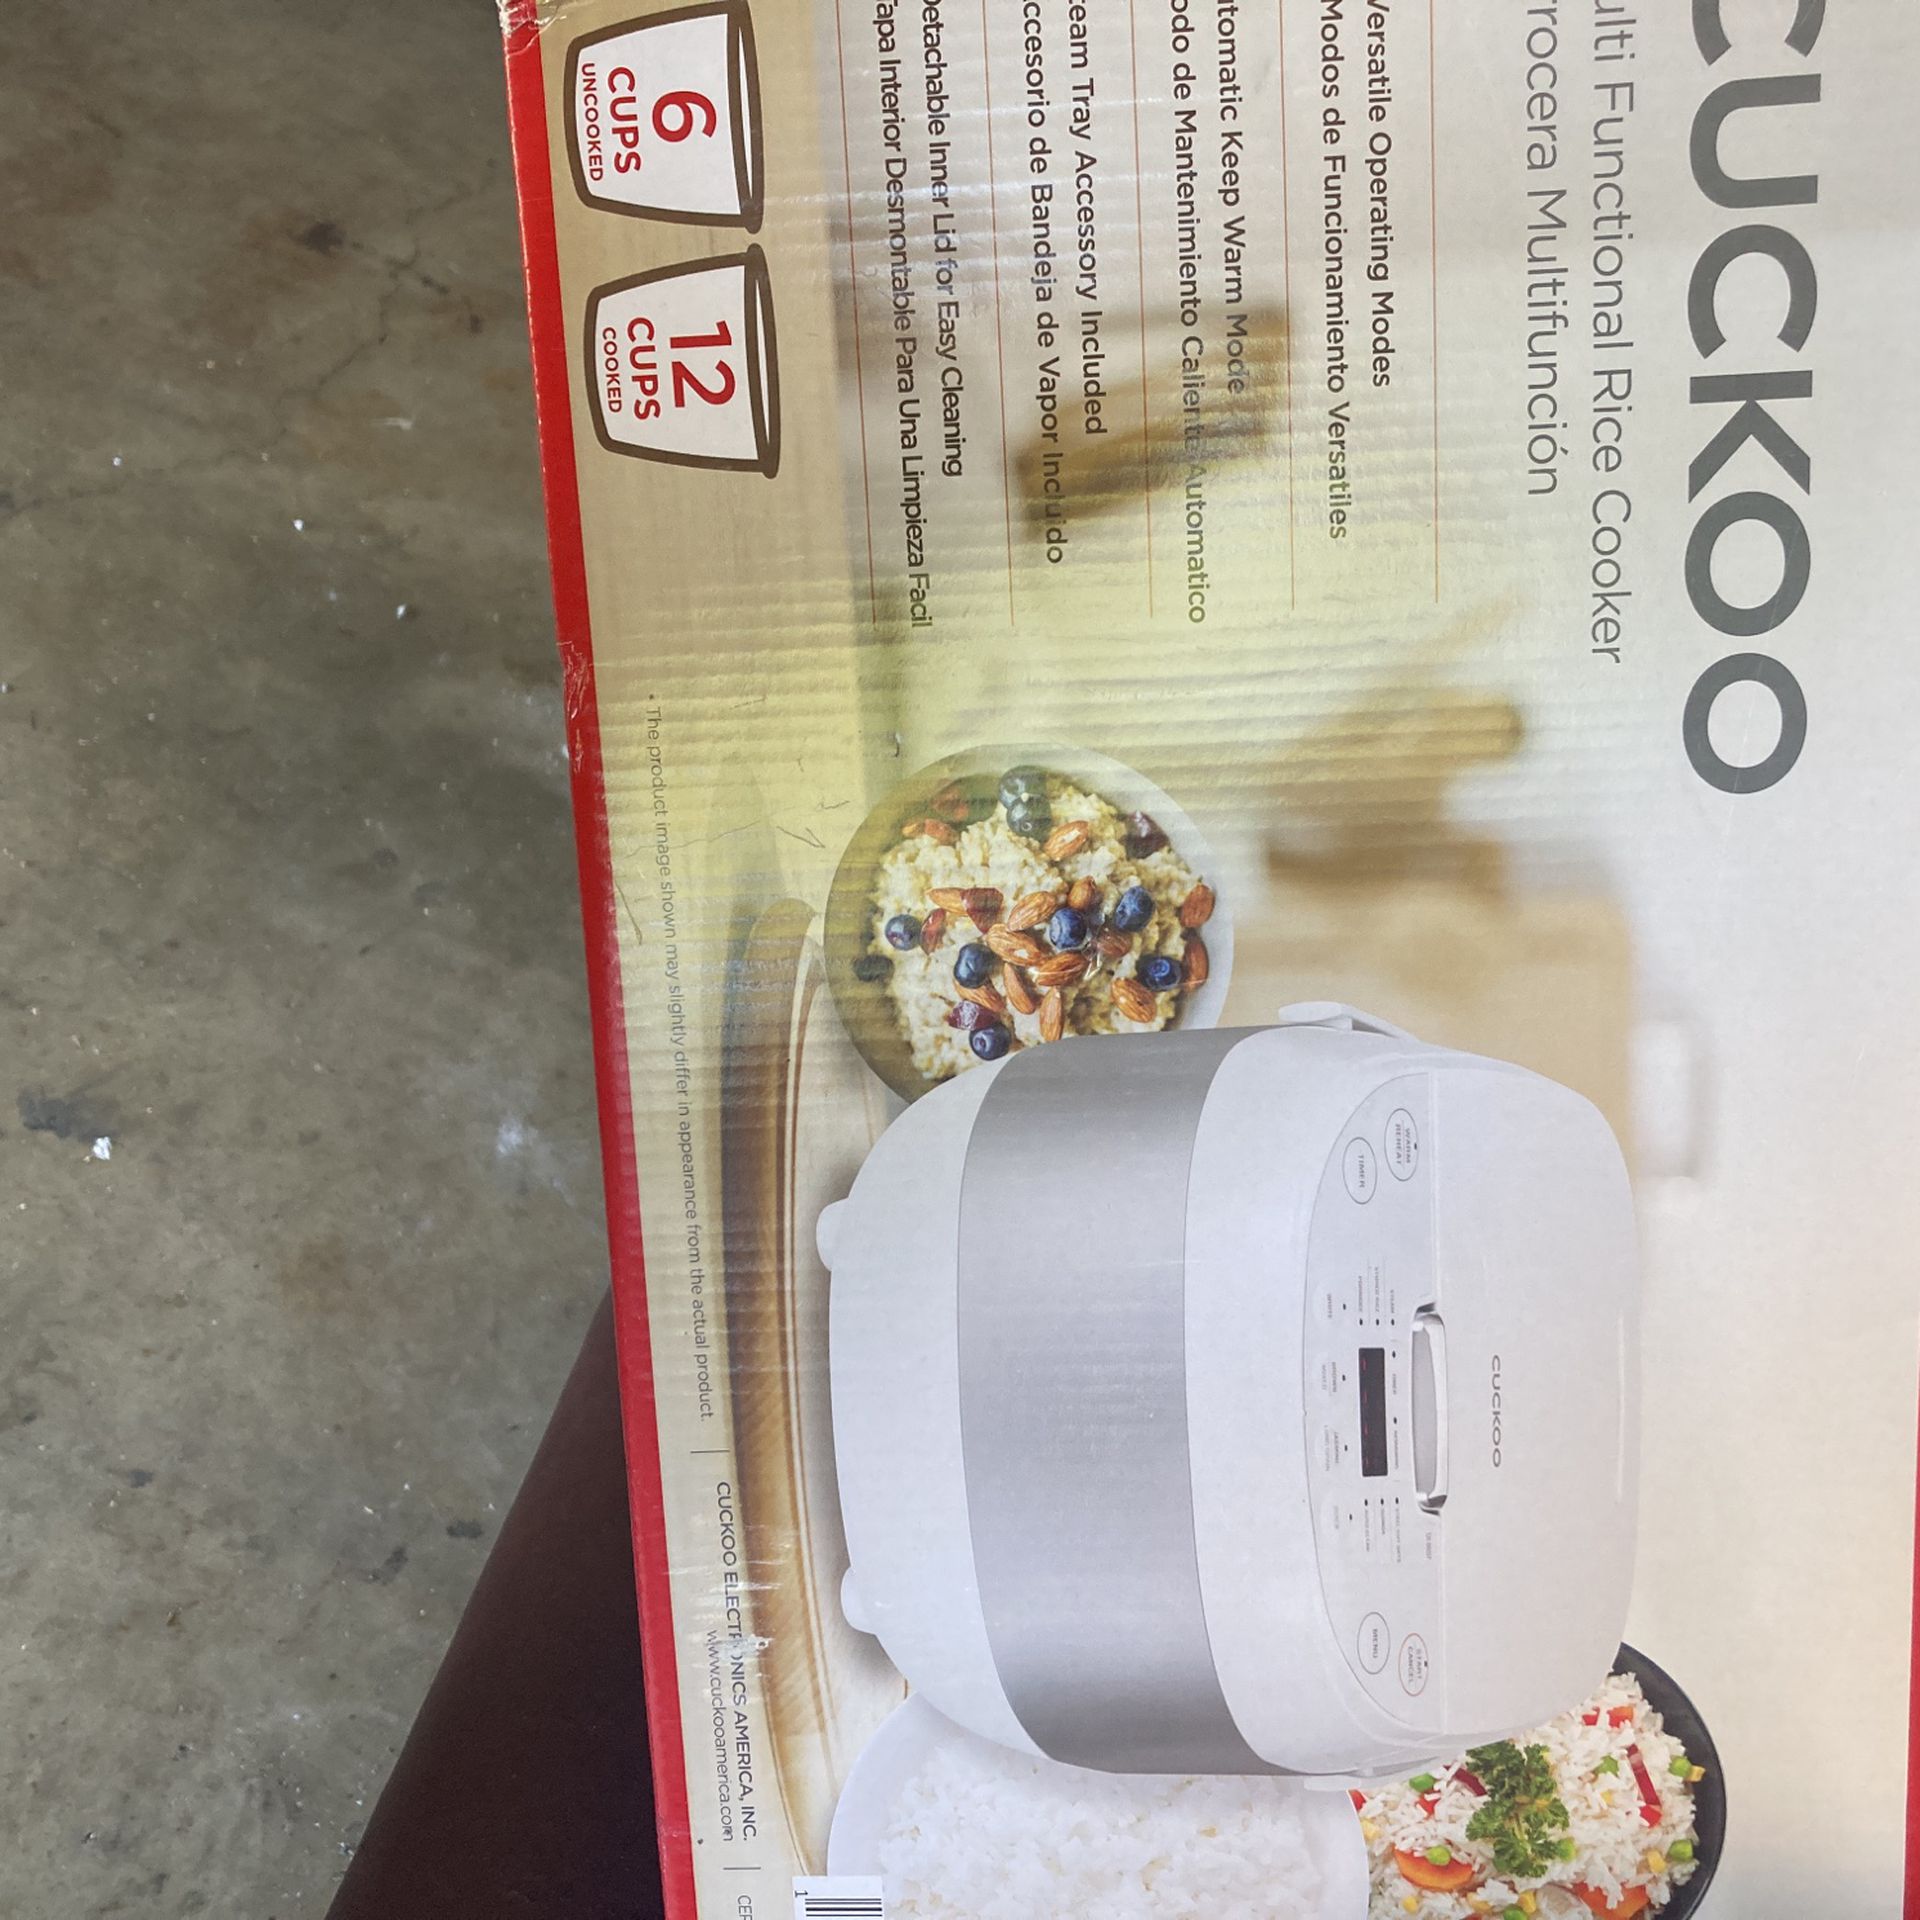 Rice Cooker Non Stick (Imusa) for Sale in Fullerton, CA - OfferUp